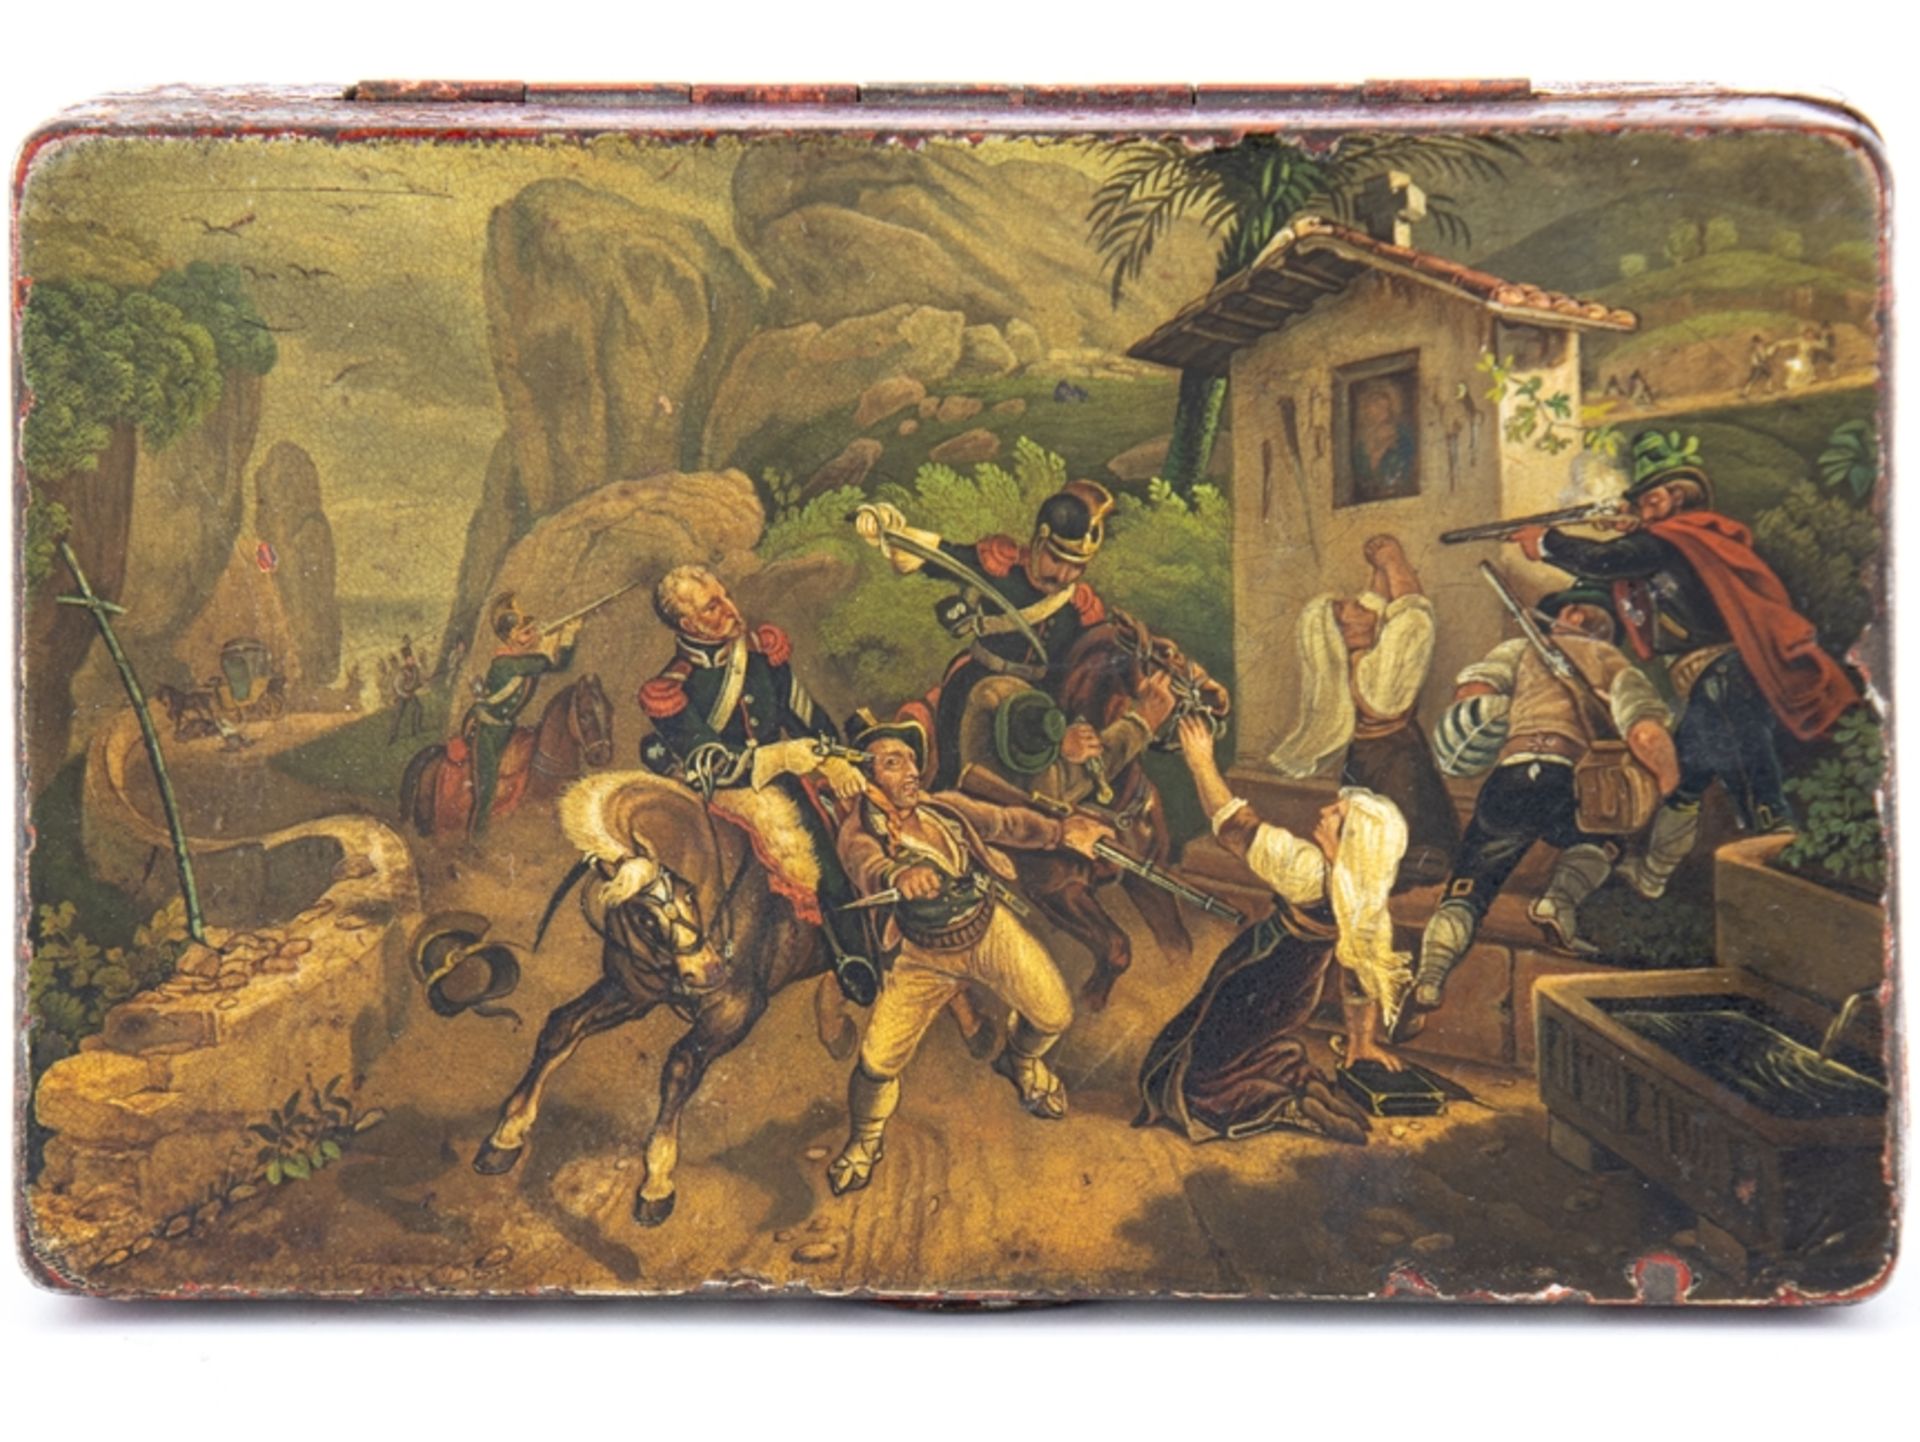 Hand-painted cigar box, tabatiere, robbery scene probably Italy, end of 19th century.